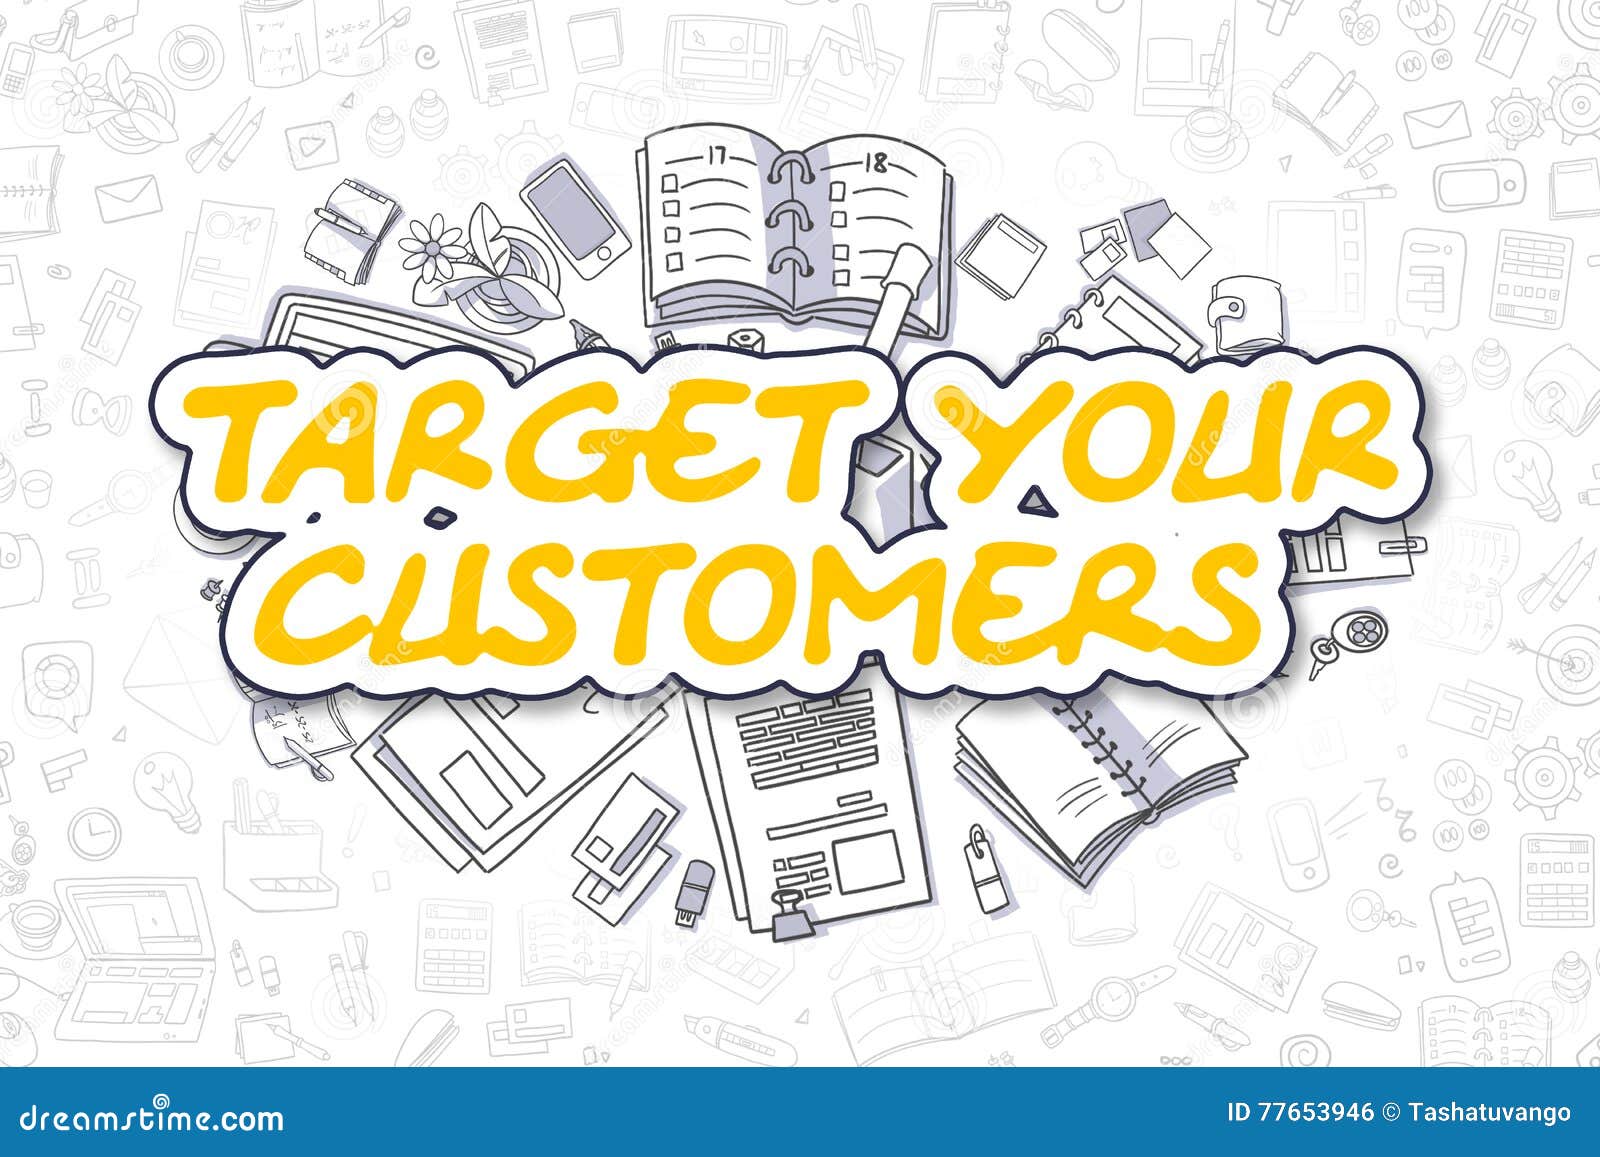 Target Your Customers - Business Concept. Stock Illustration ...